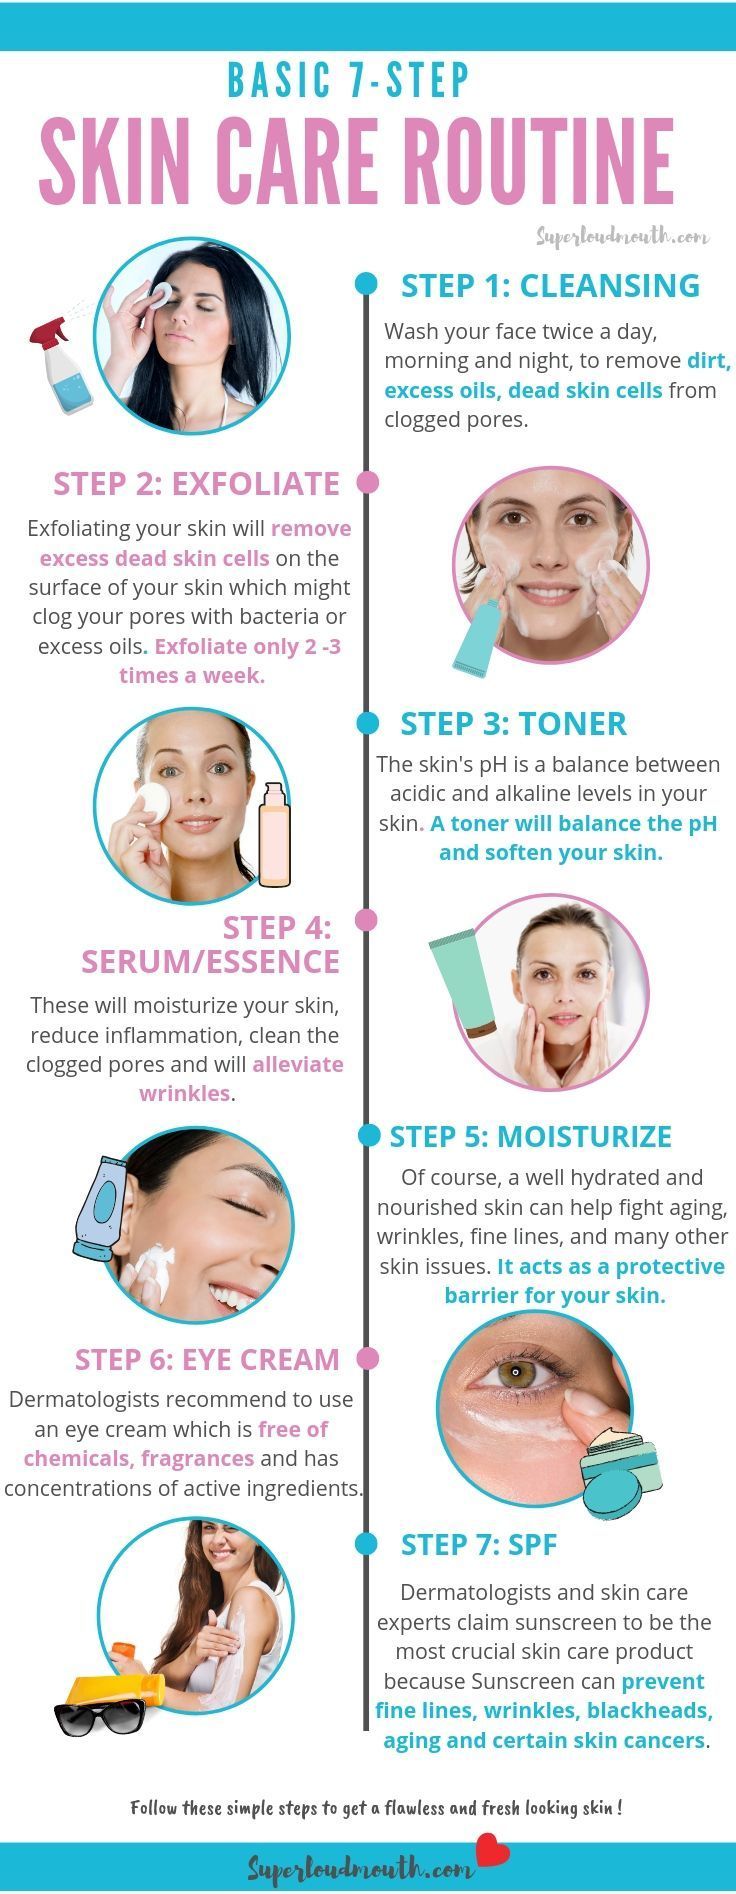 6 Precious Tips To Help You Get Better At Daily Skin Care Routine -   6 daily skin care Steps ideas